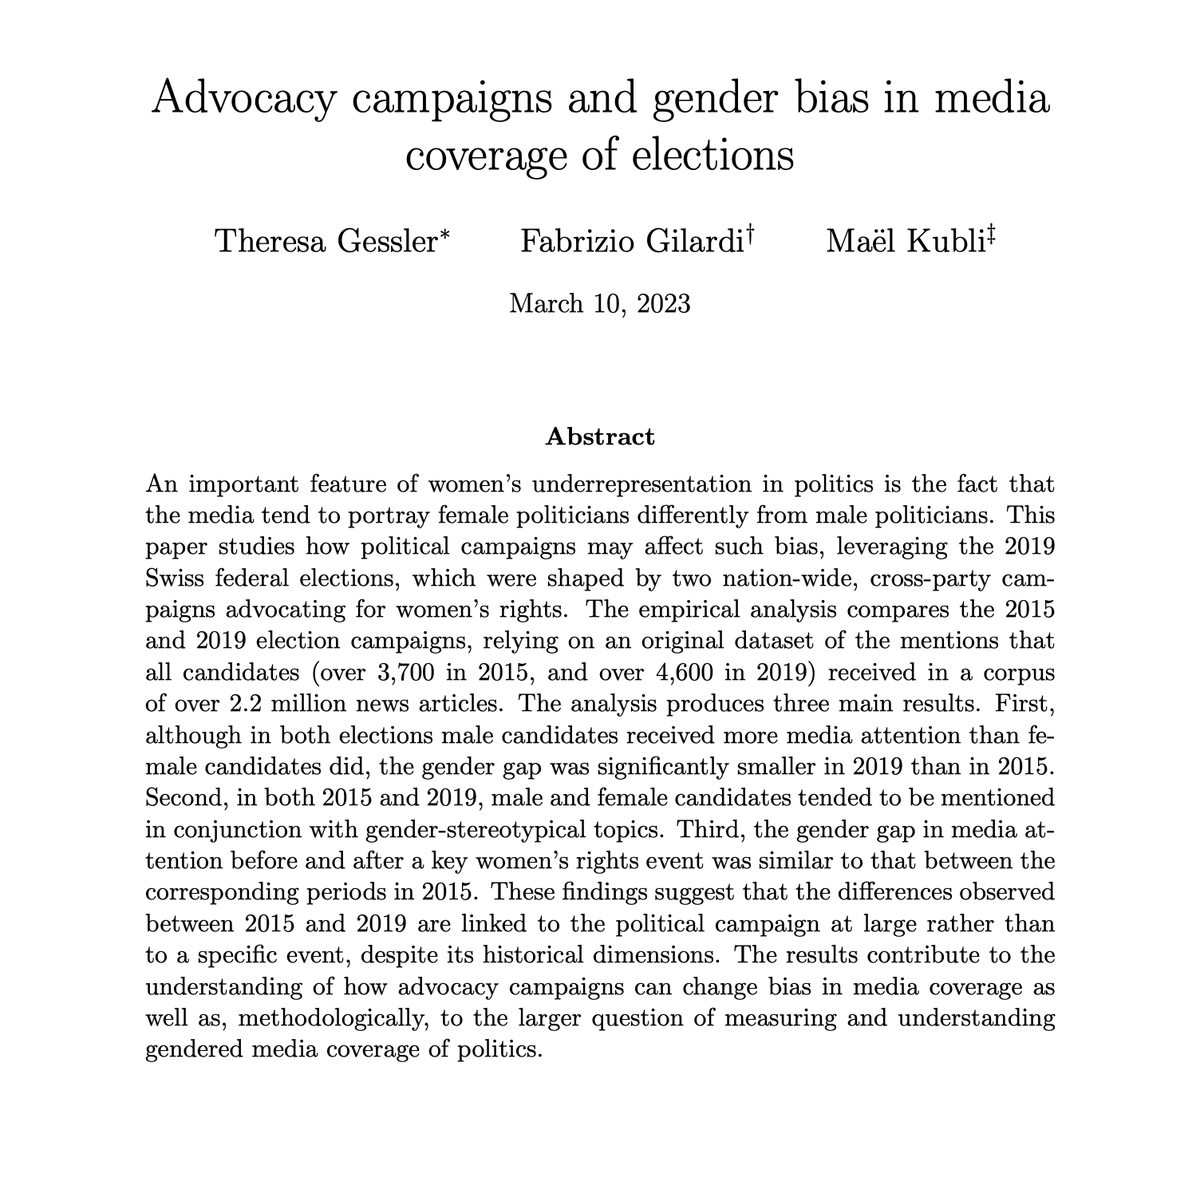 Advocacy campaigns and gender bias in media coverage of elections New paper together with @th_ges & @MaelKubli osf.io/y8bc3/